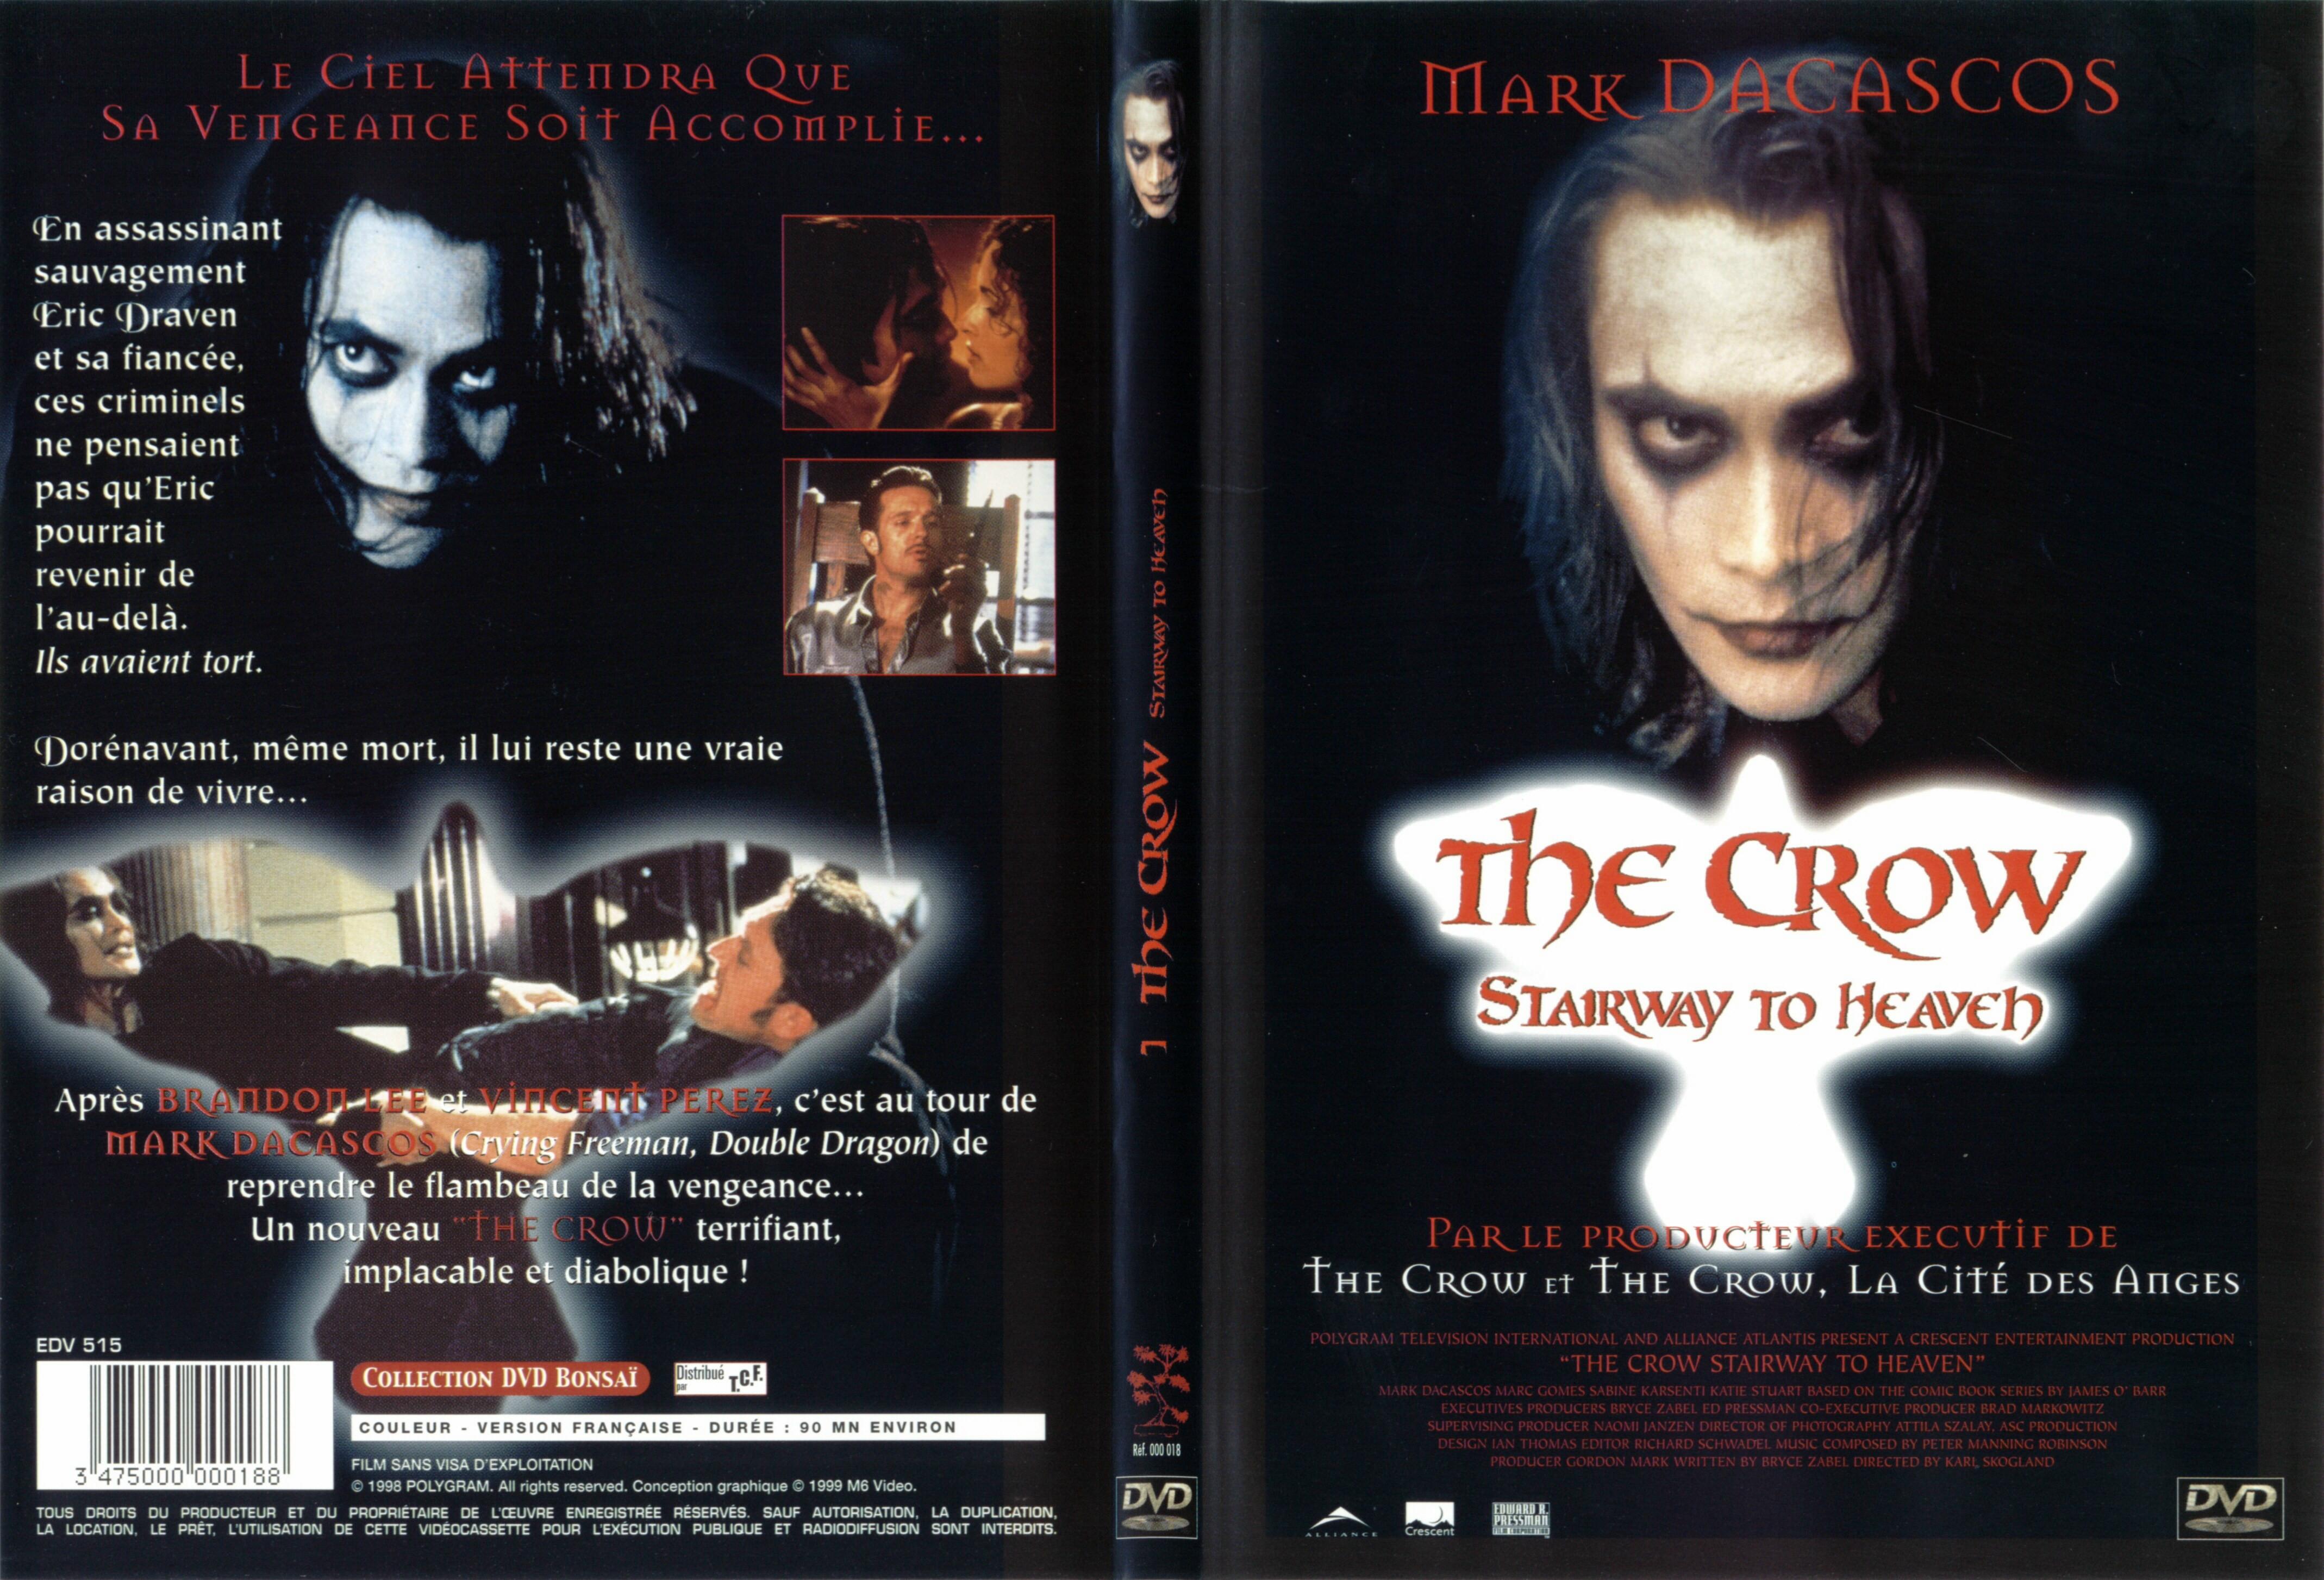 Jaquette DVD The crow stairway to heaven - SLIM